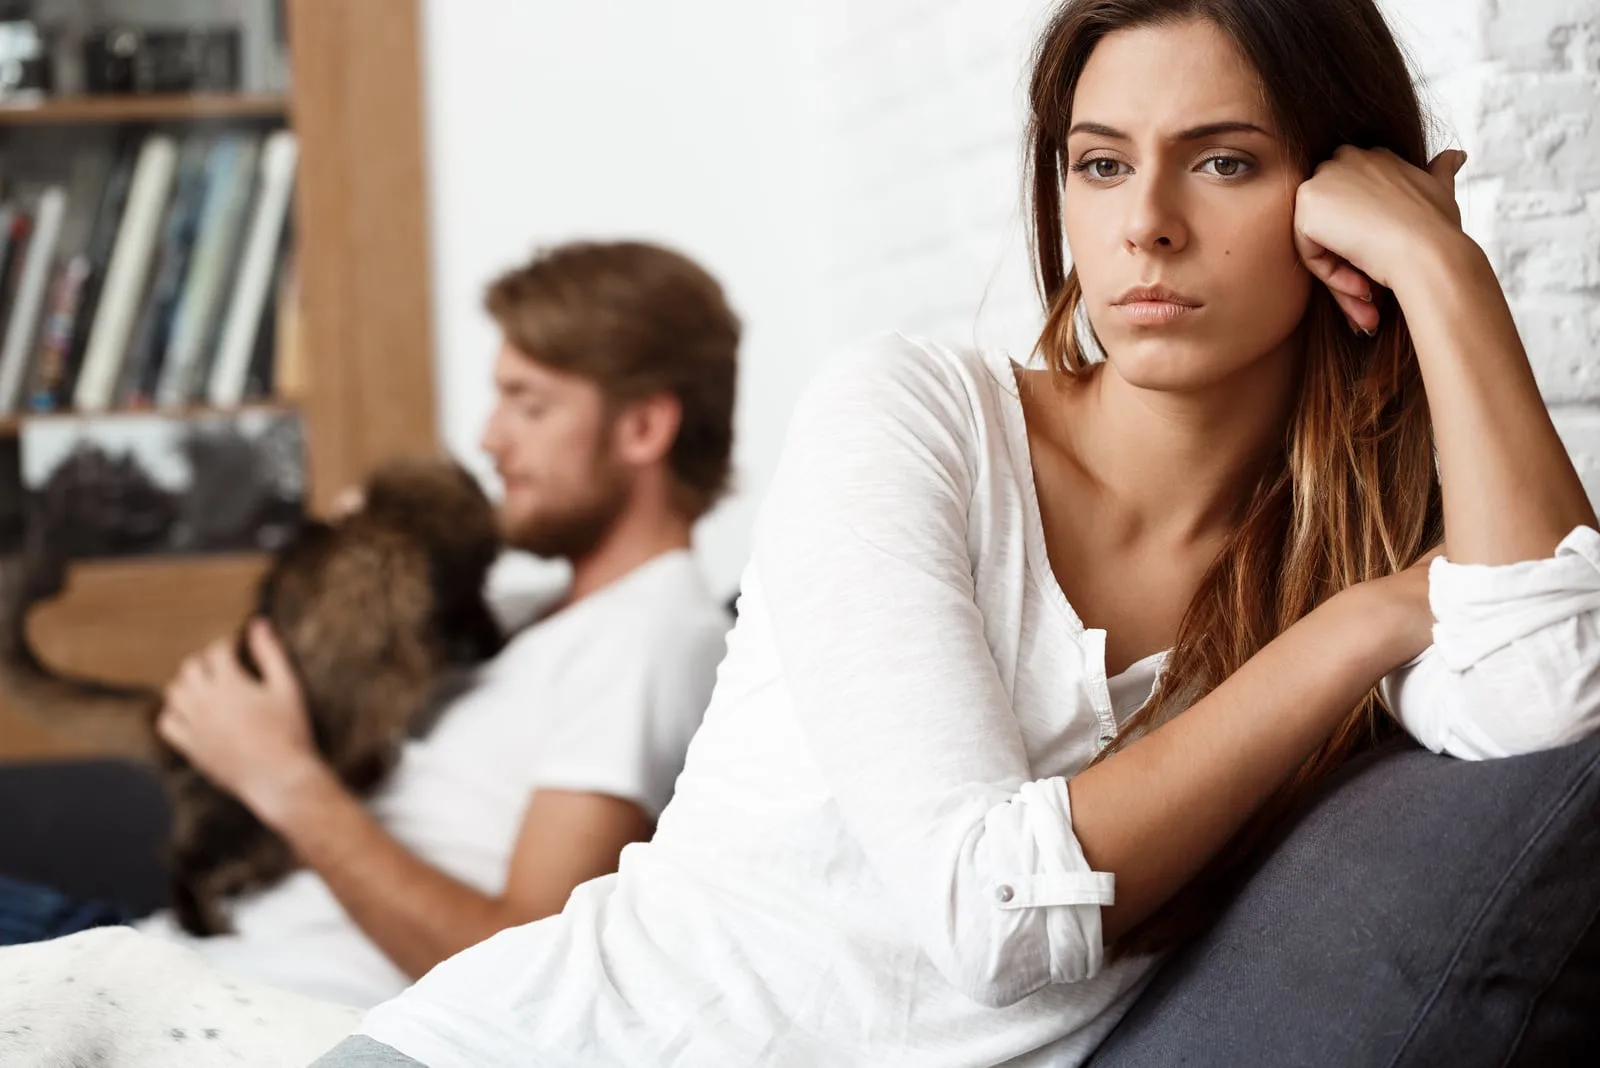 sad woman sitting apart from man who is playing with cat